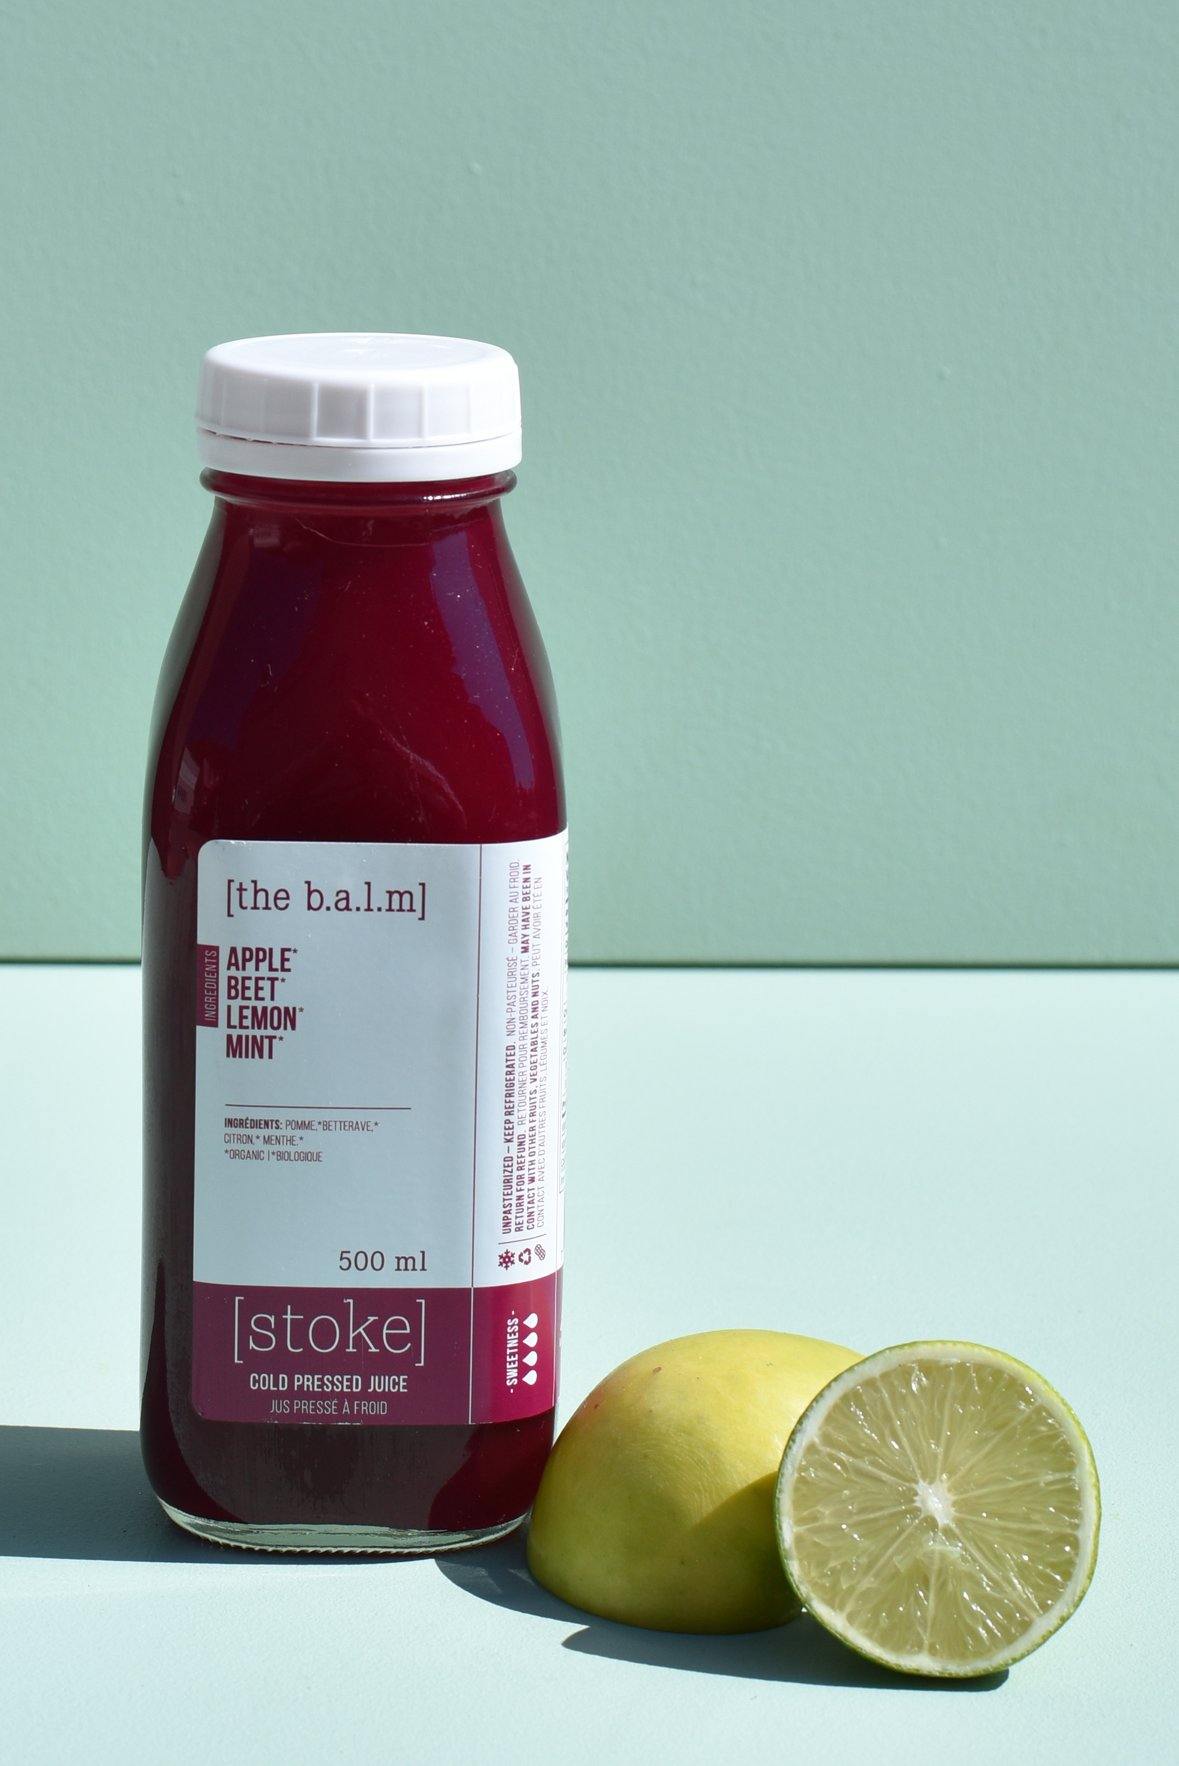 [ the b.a.l.m ] cold pressed juice with beet